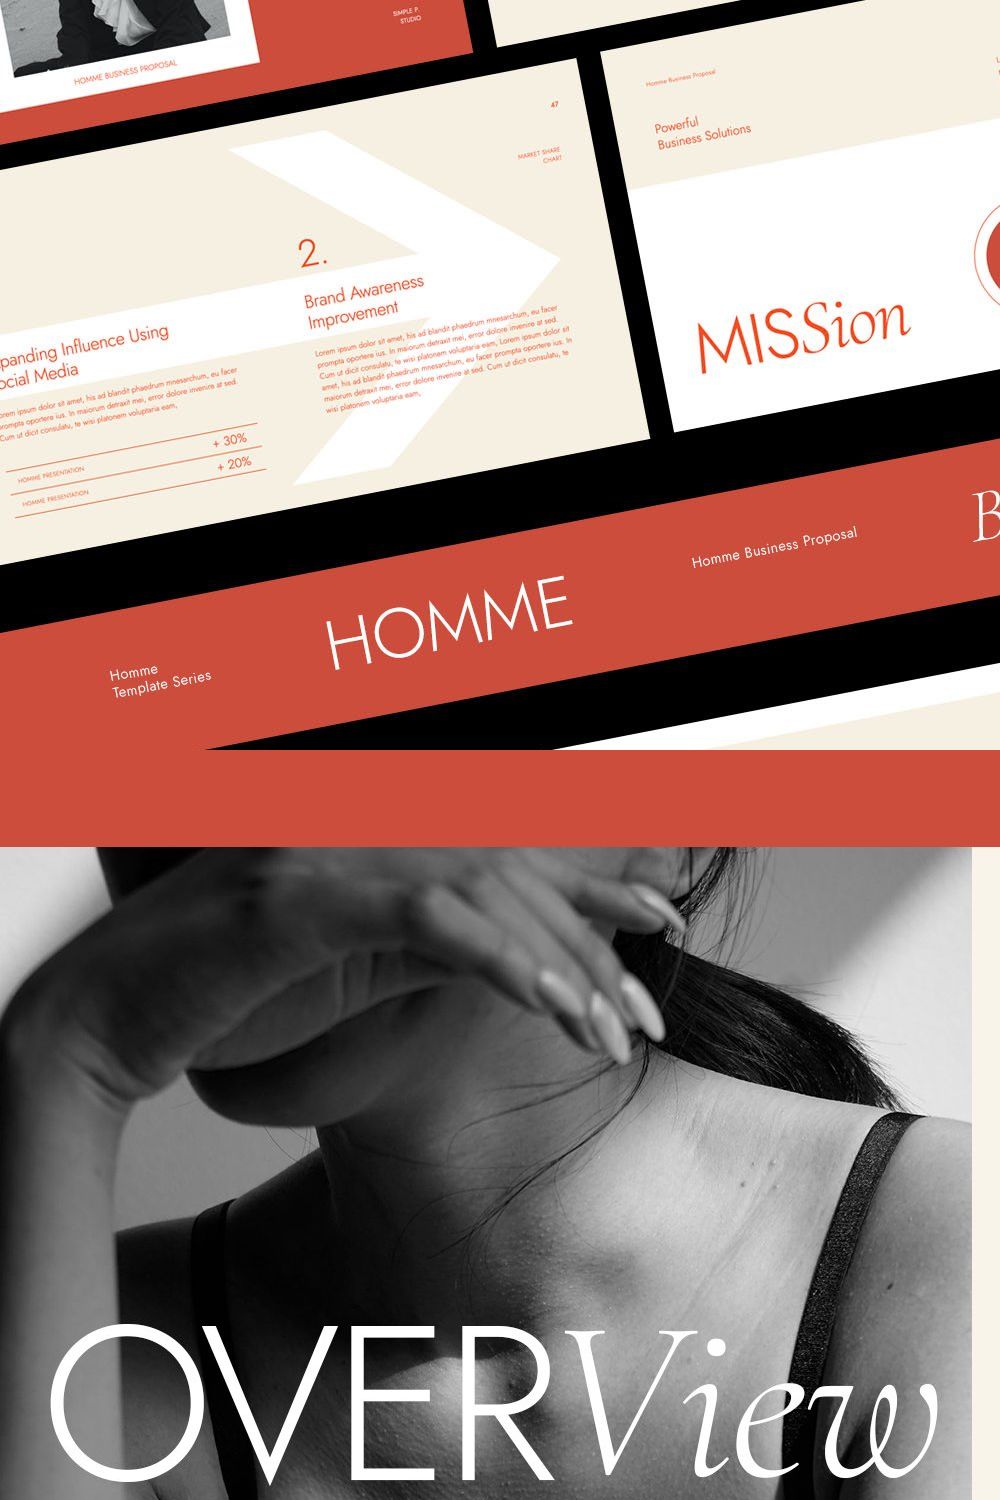 HOMME Business Proposal pinterest preview image.